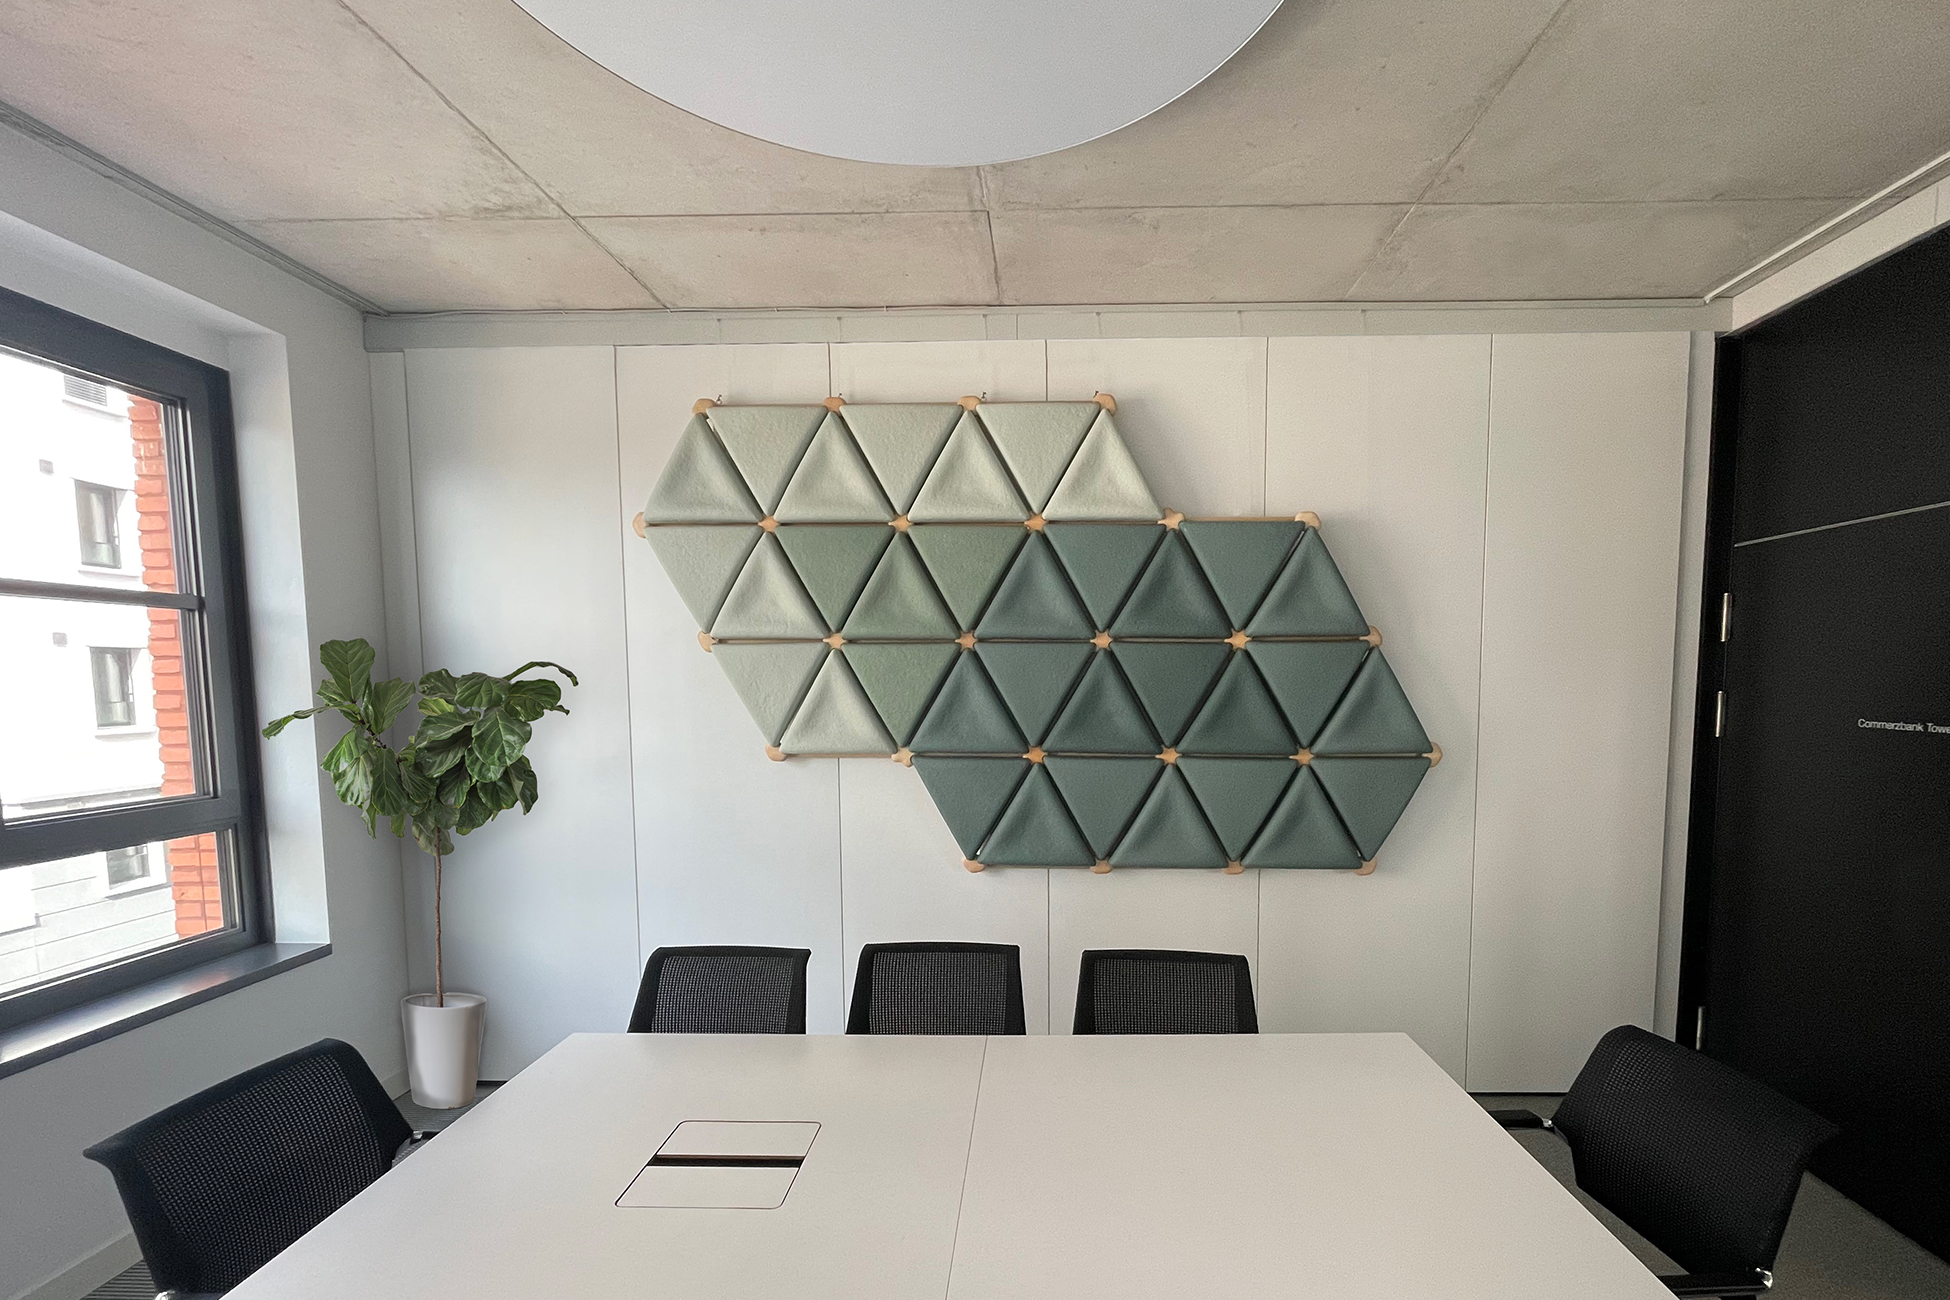 ARUP FRANKFURT // FORESTA SYSTEM FOR OFFICE SPACES